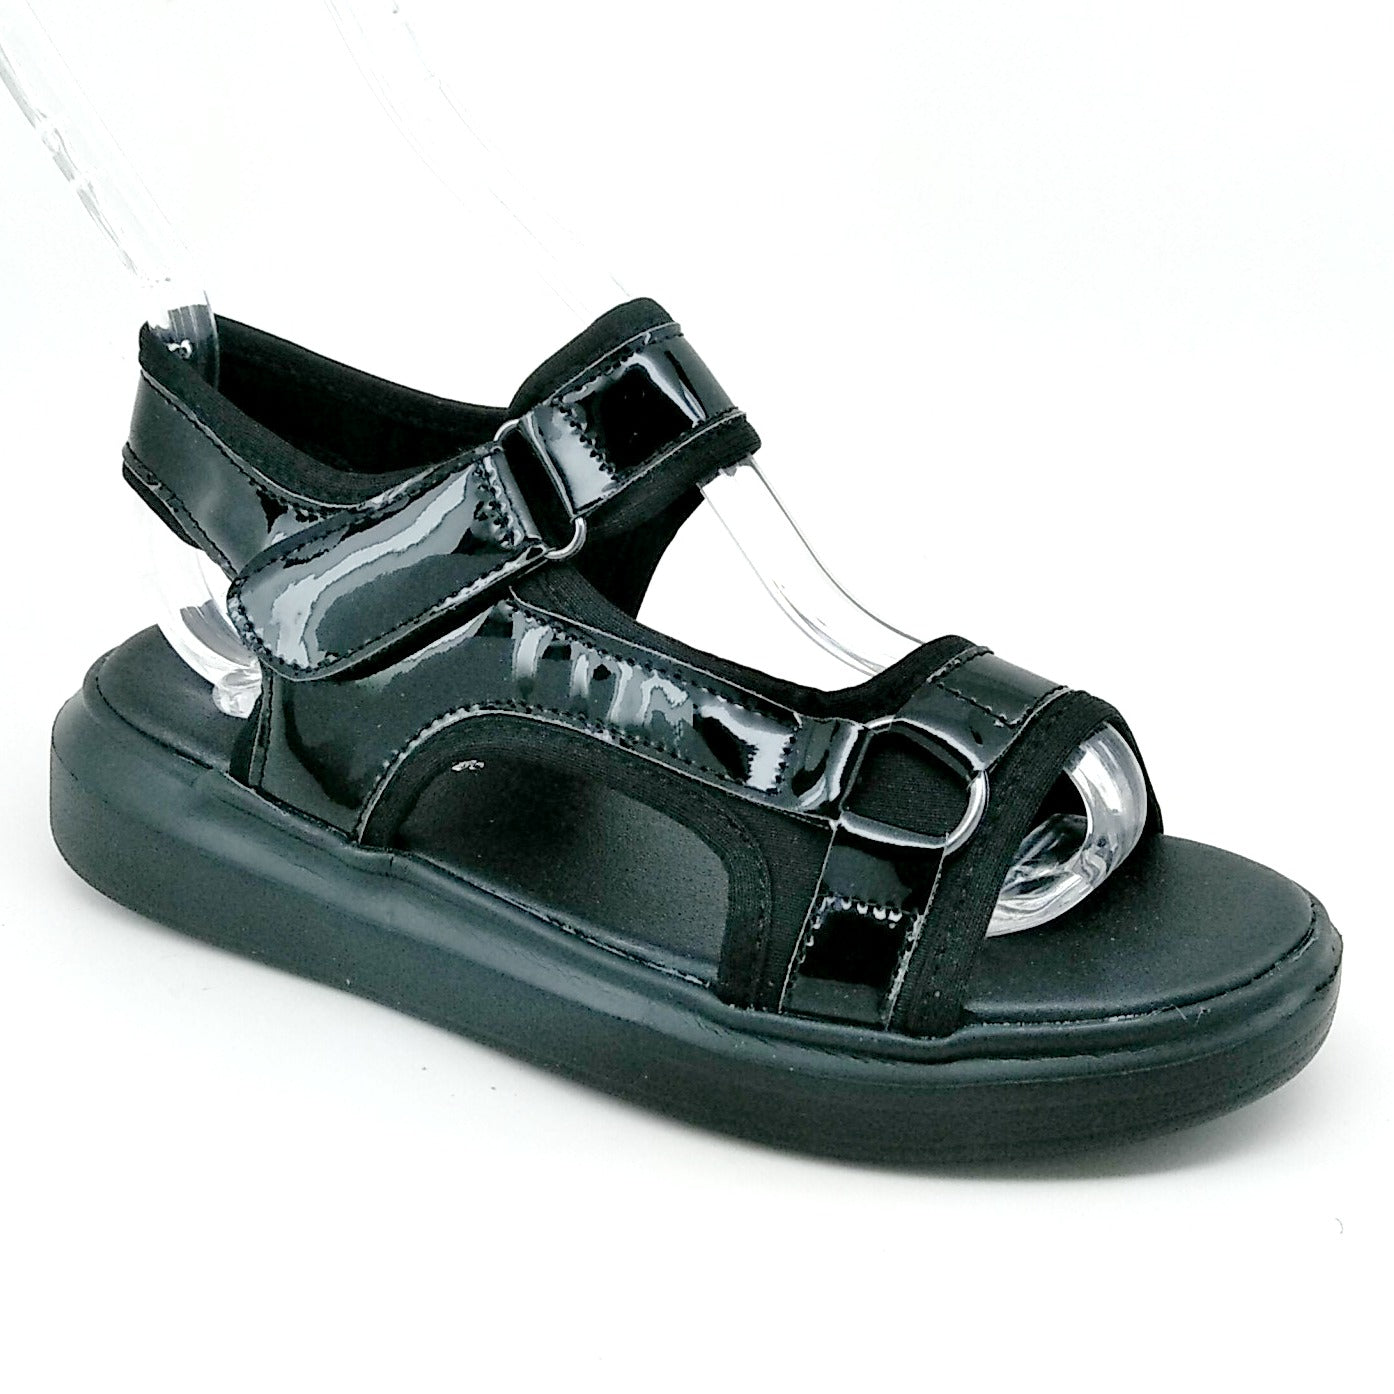 Women's Black Sport Sandal with Hook and Loop Strap